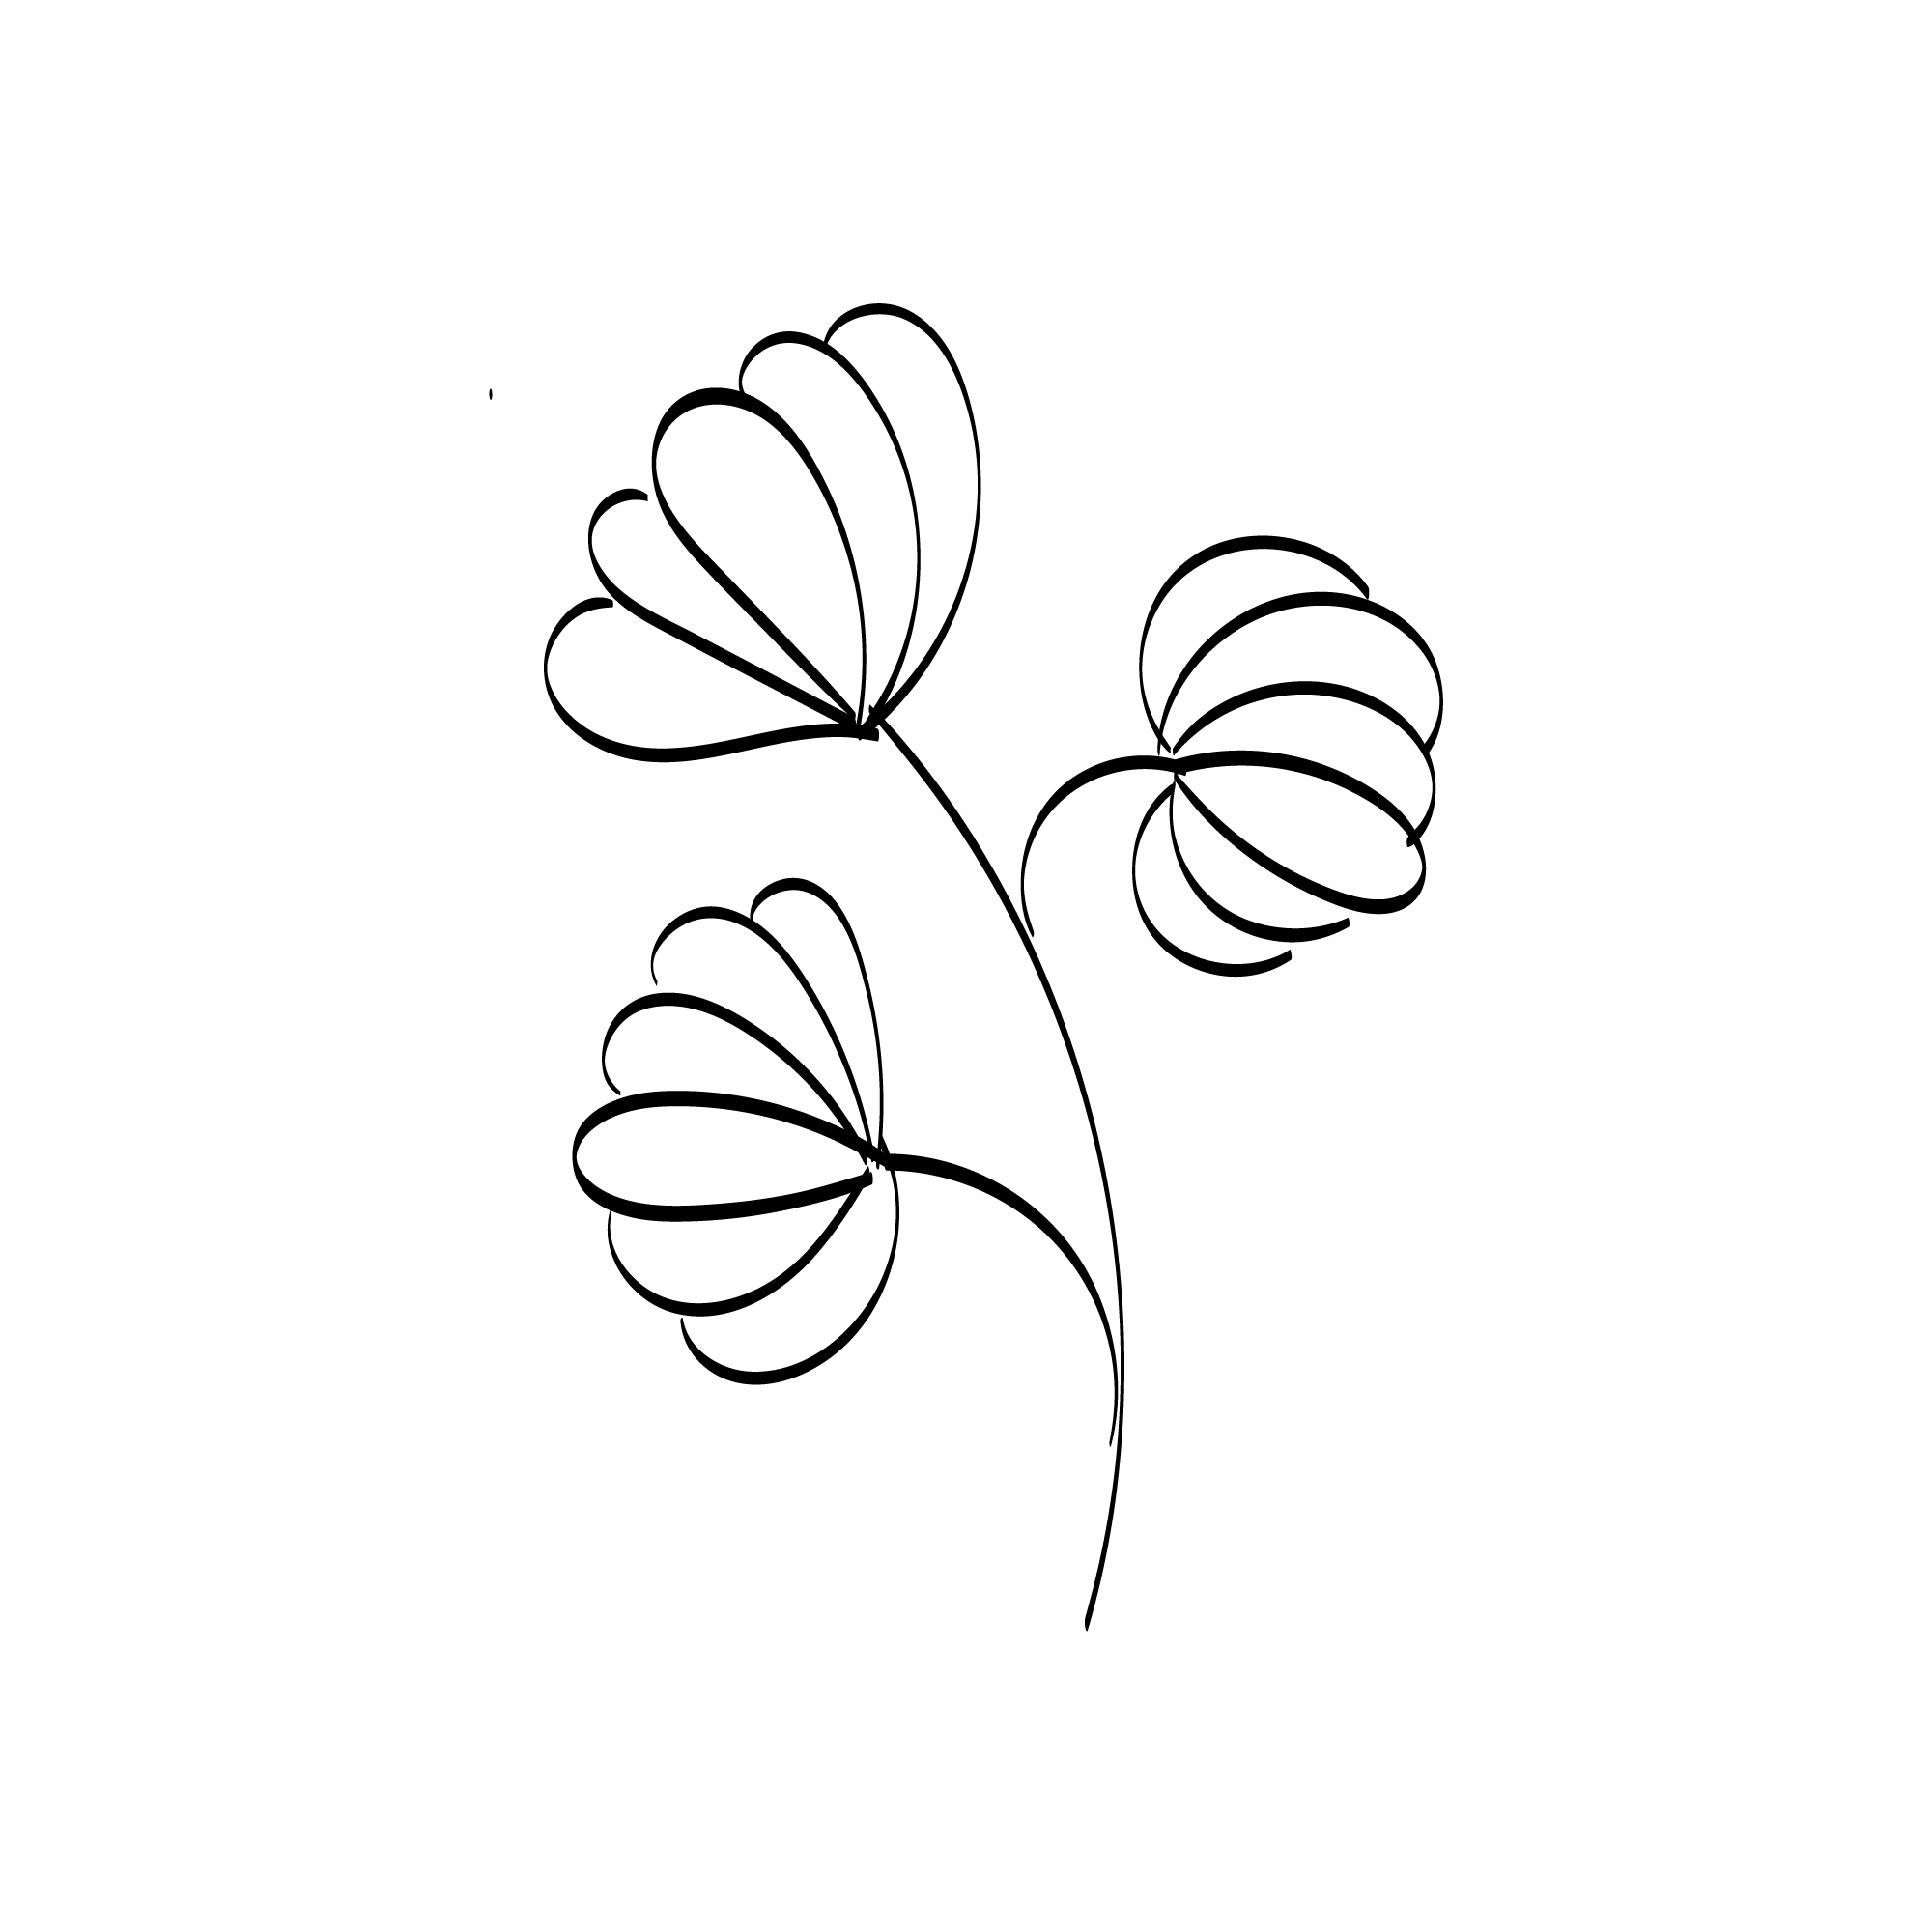 Simple Flower Art Drawing with Line-art Preview image.